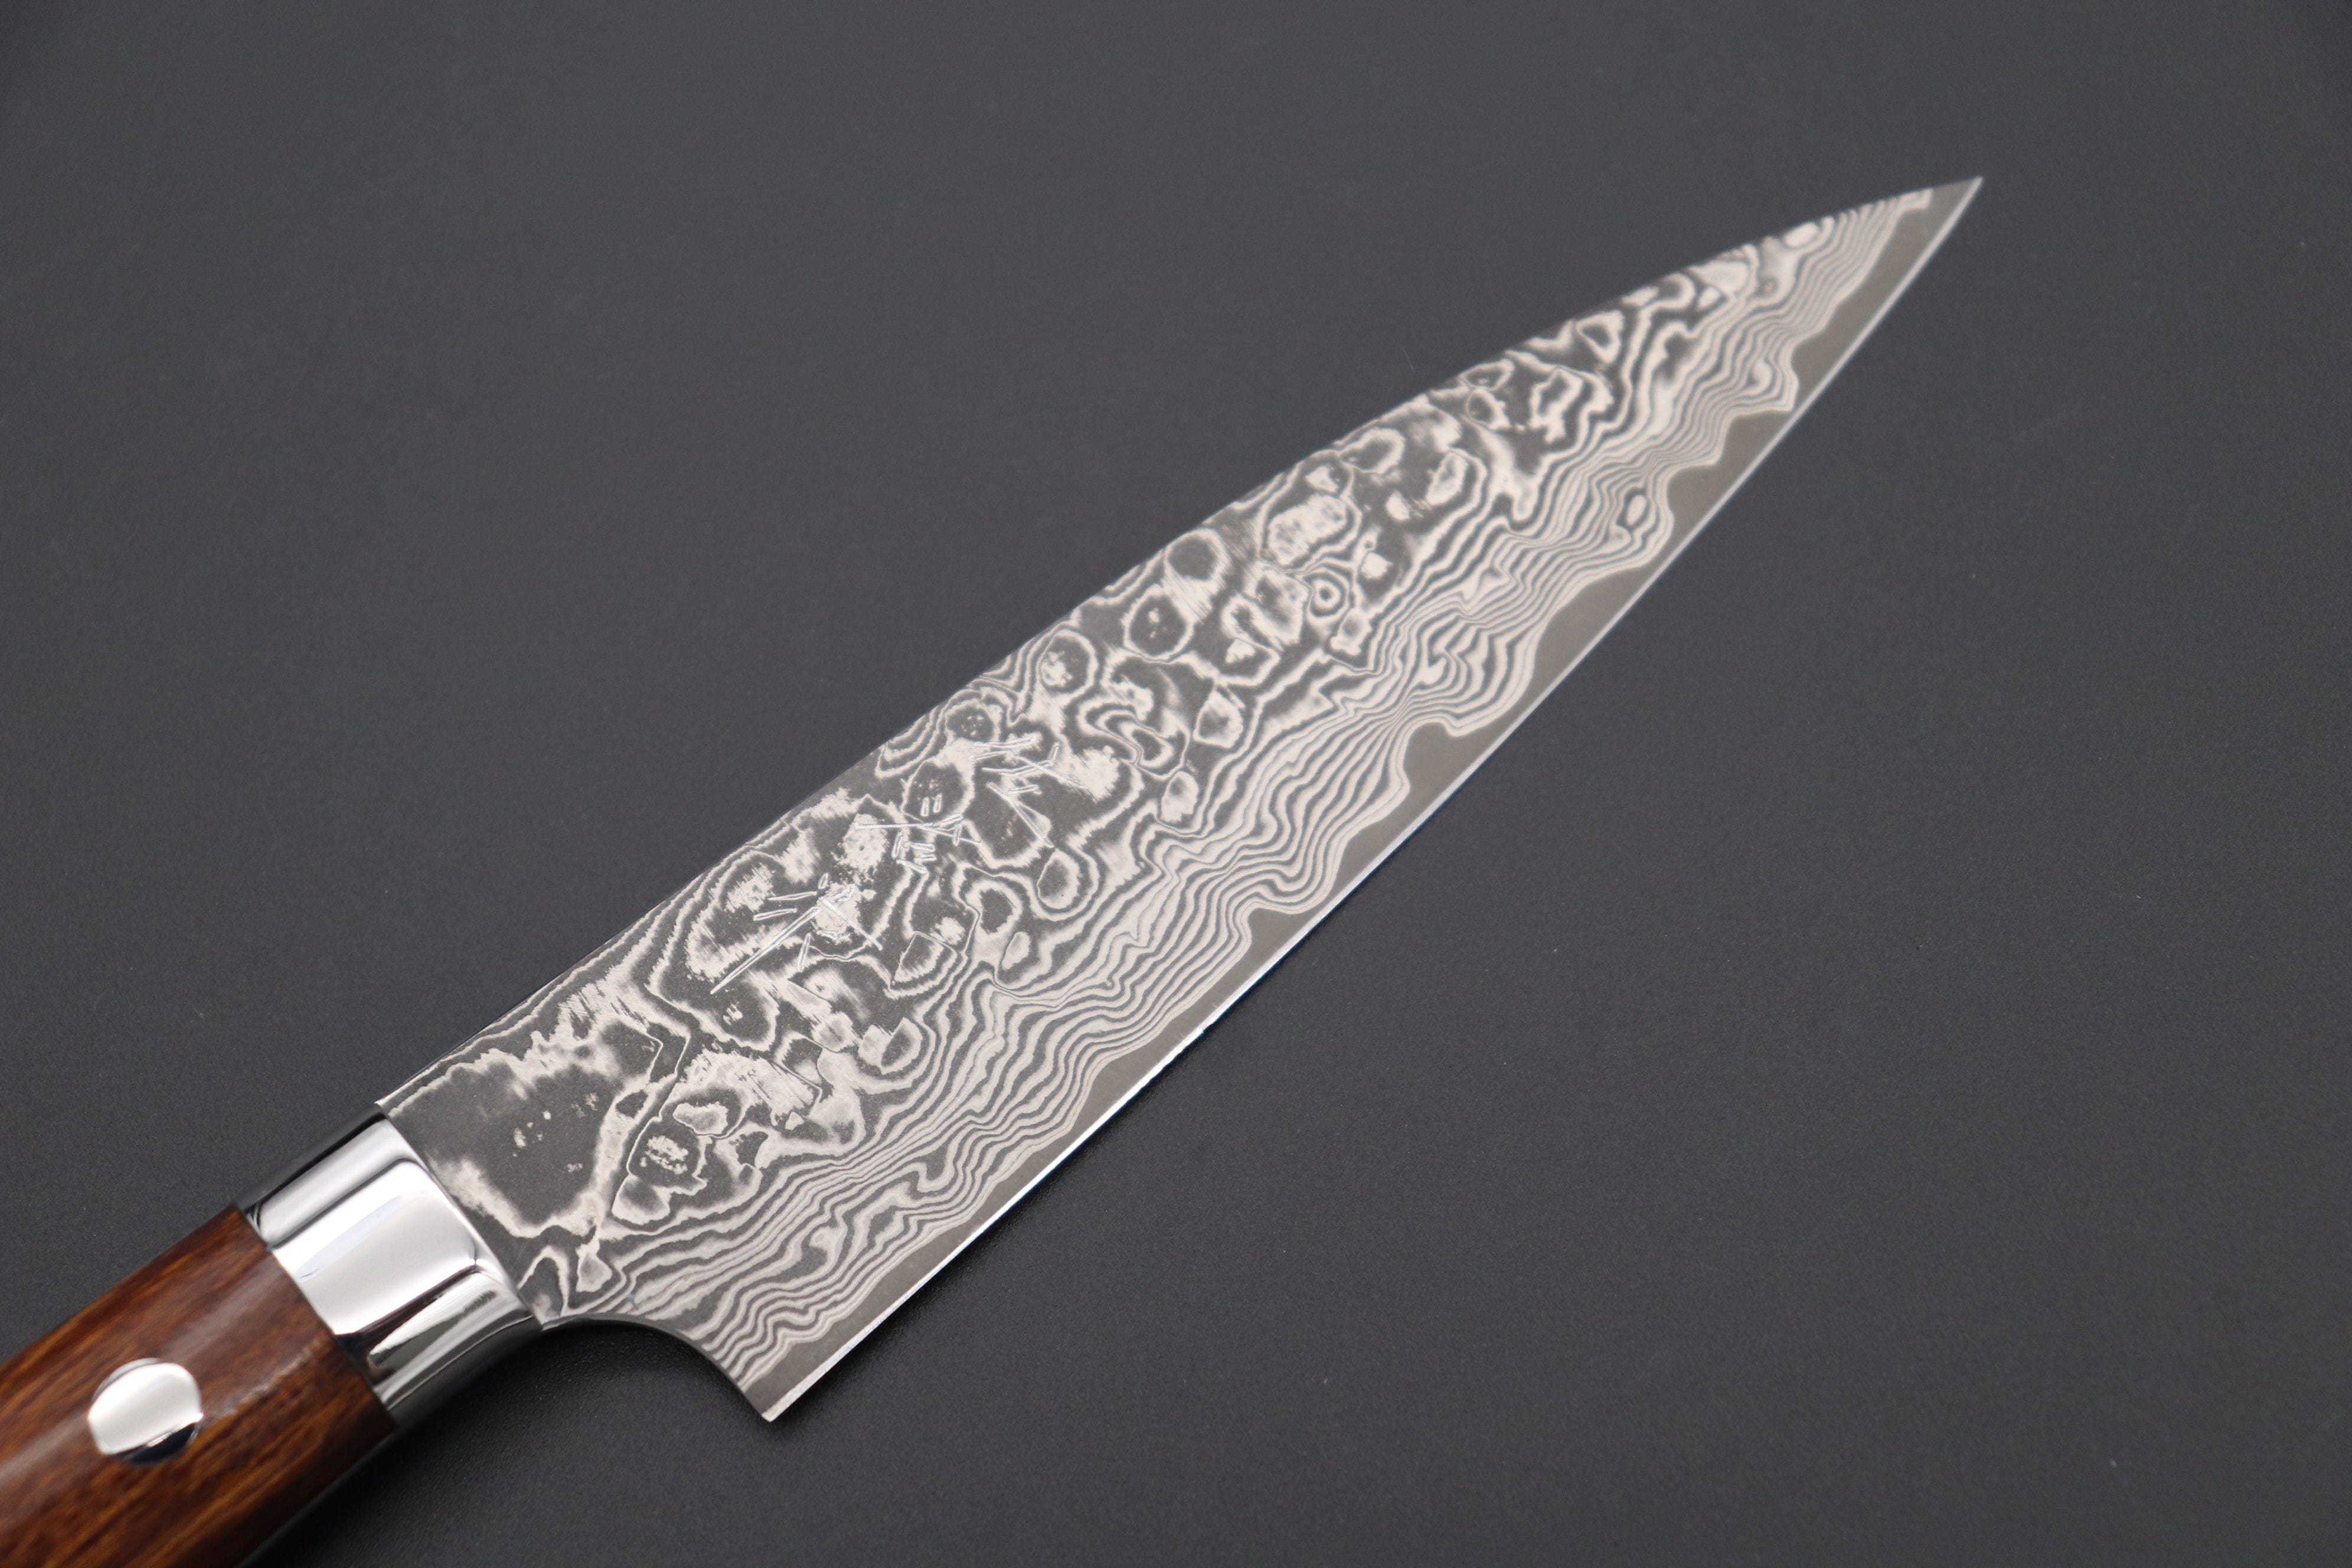 Top 15 New Professional Damascus Sushi Knife Forged Steel